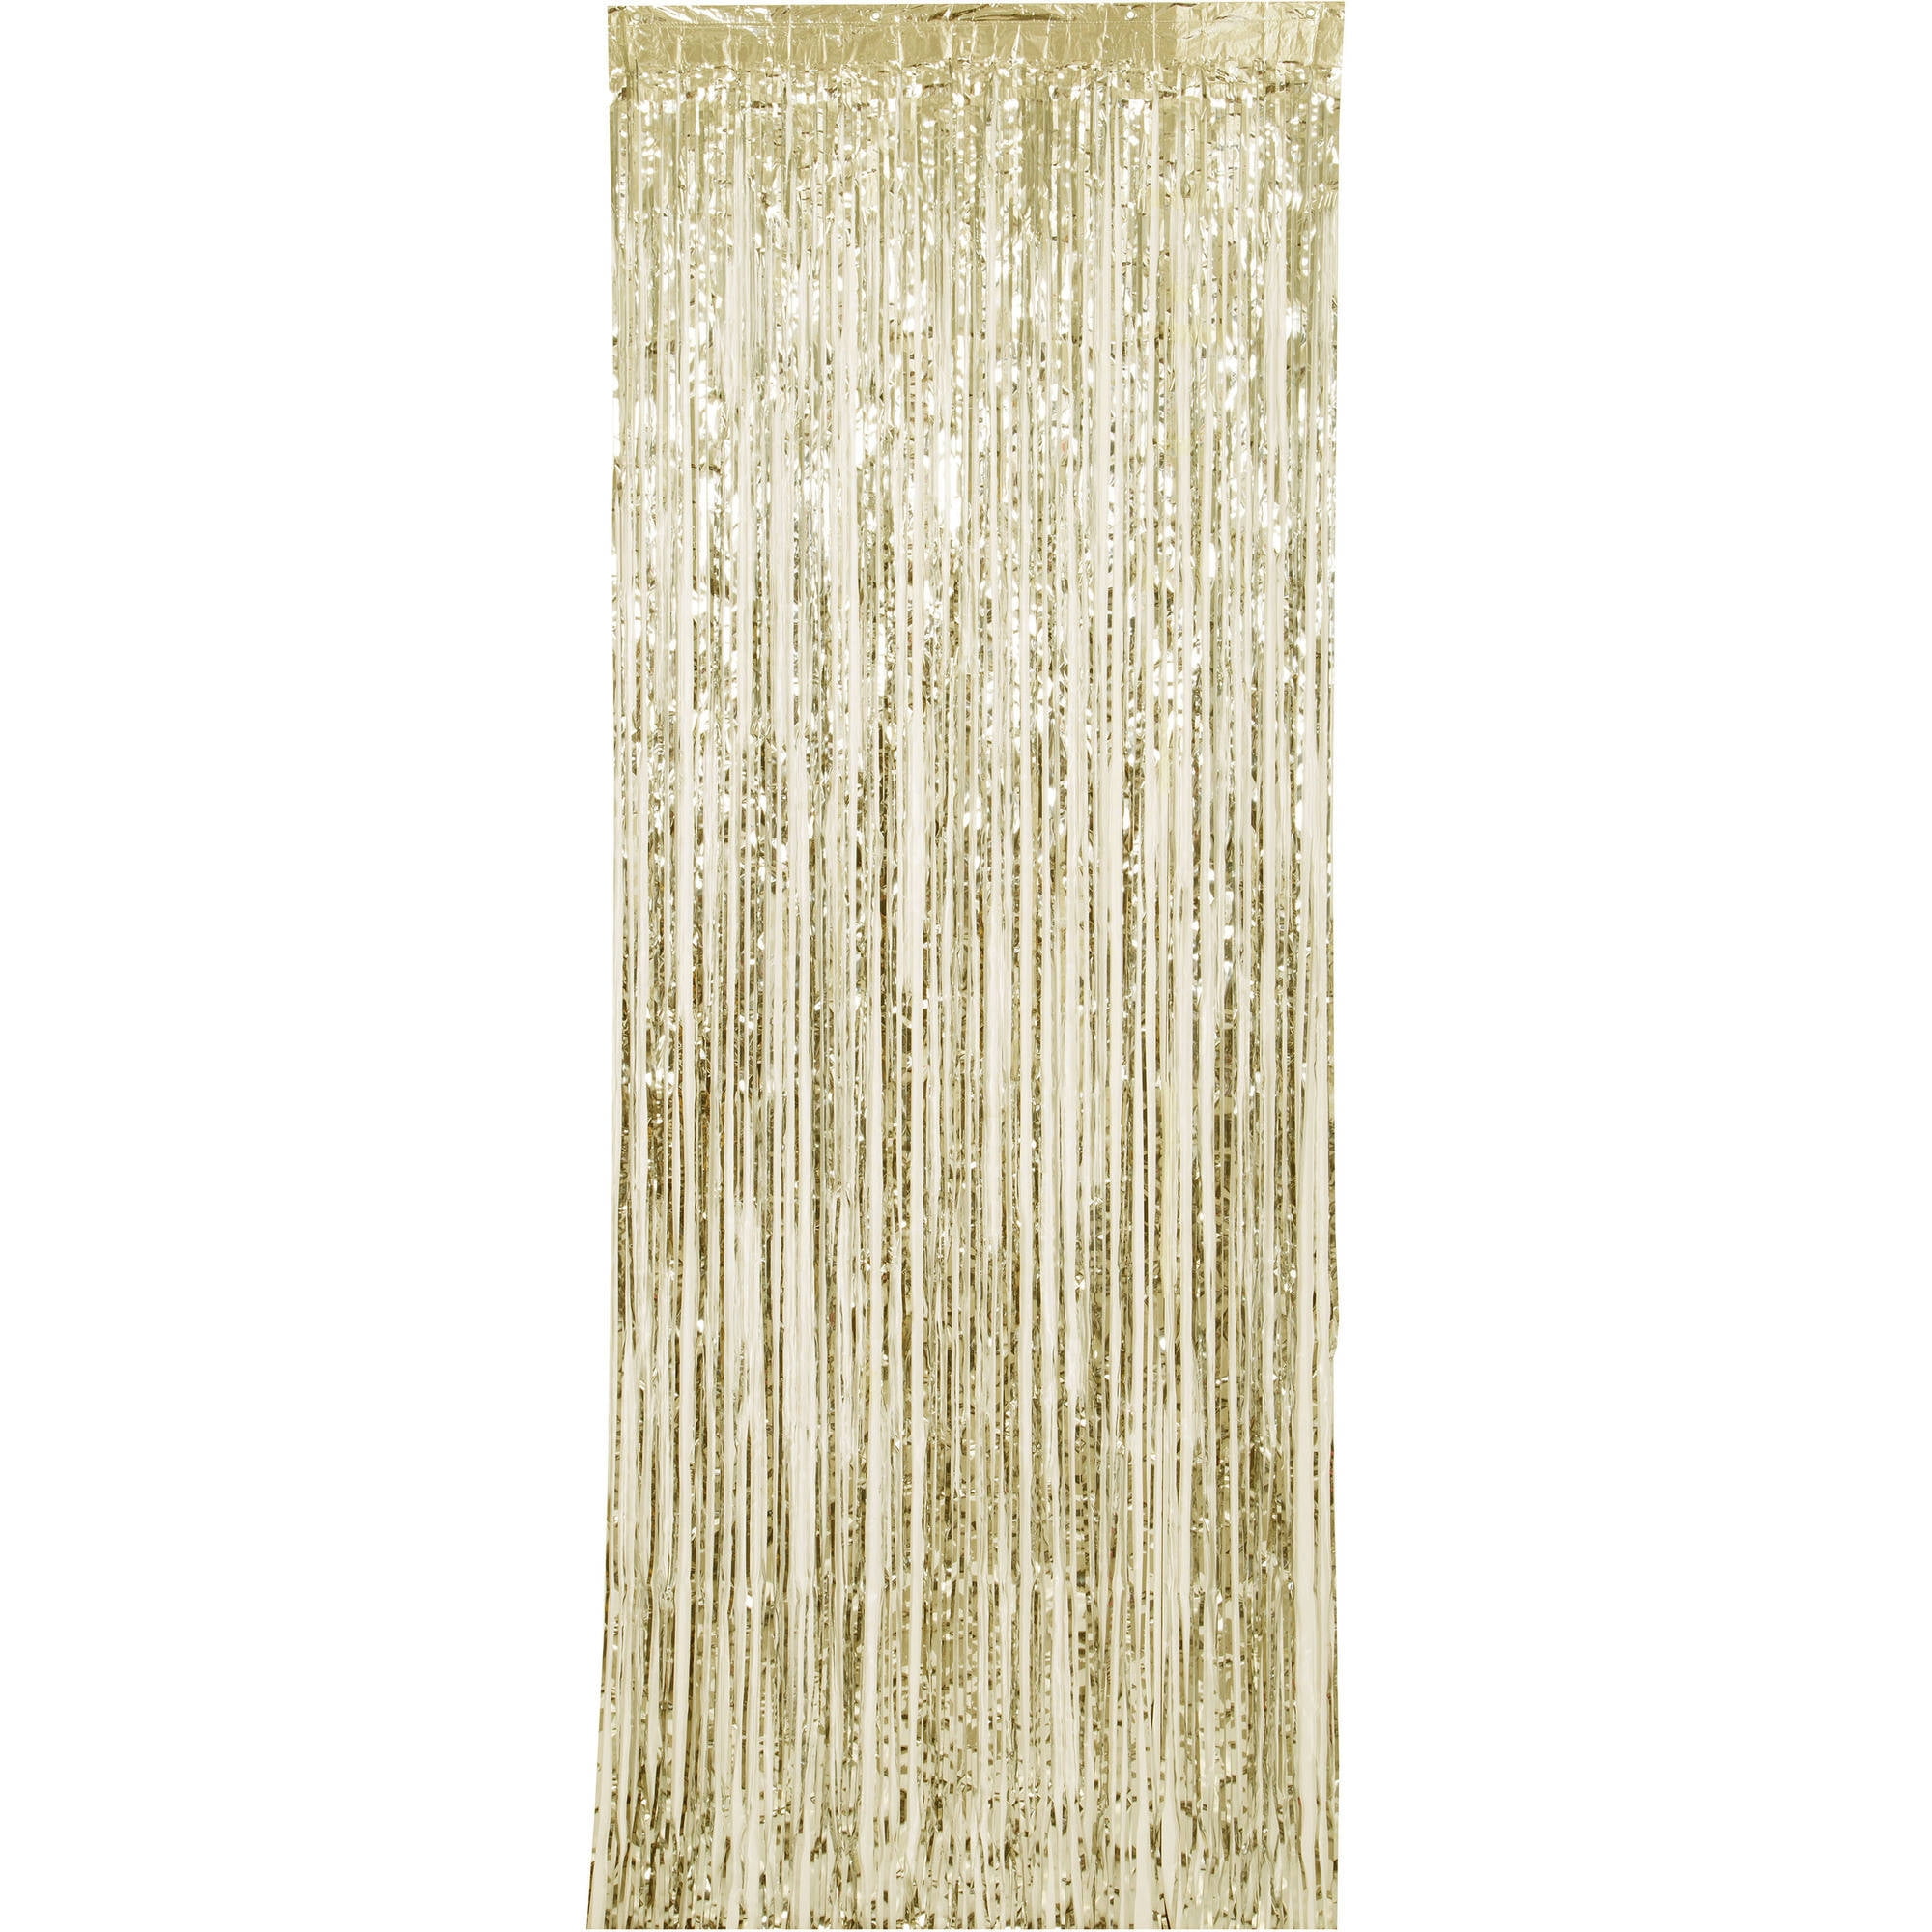 Christmas Party Decoration Door Tinsel Shimmer Curtain Gold 91 x 244cm Smiffys 